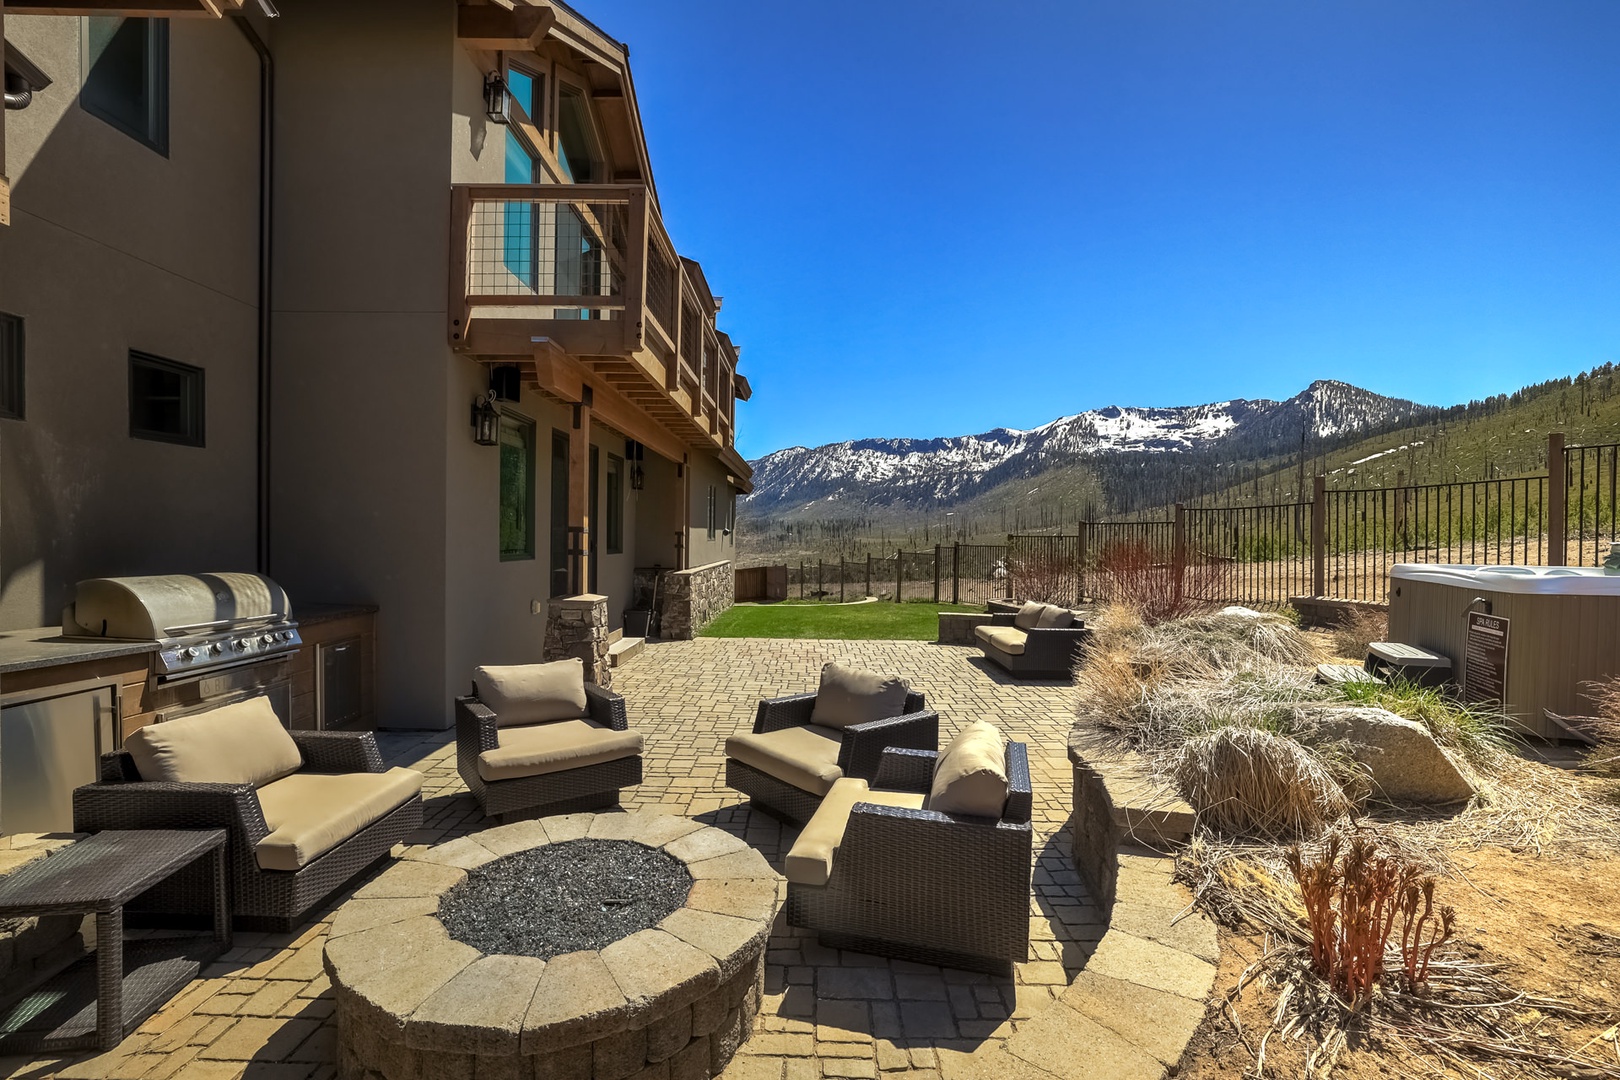 Relax outdoors around the fire pit while enjoying mountain air and gas grill and views